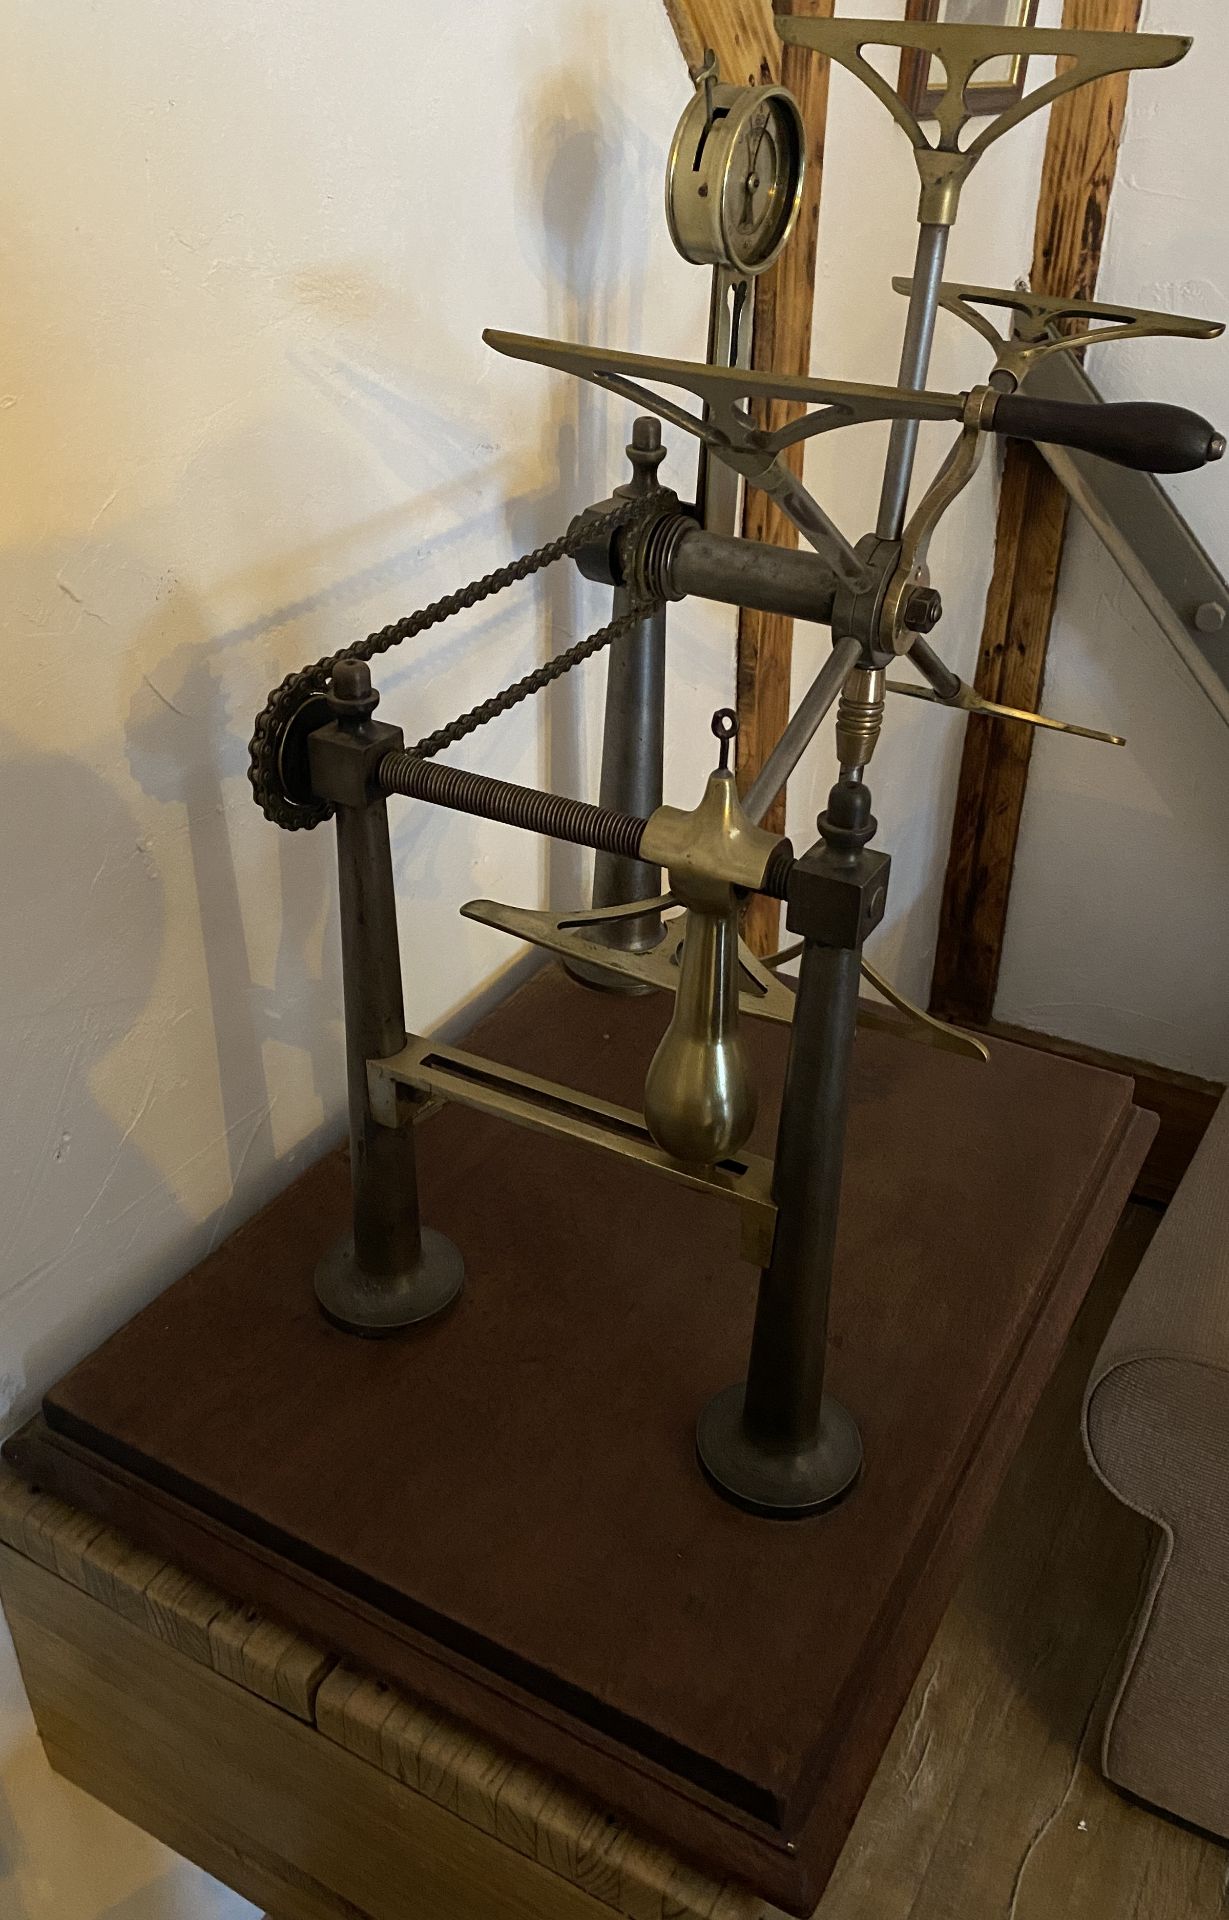 Goodbrand & Co (Manchester and Stalybridge) manual wood and brass wool winding and measuring - Image 2 of 5